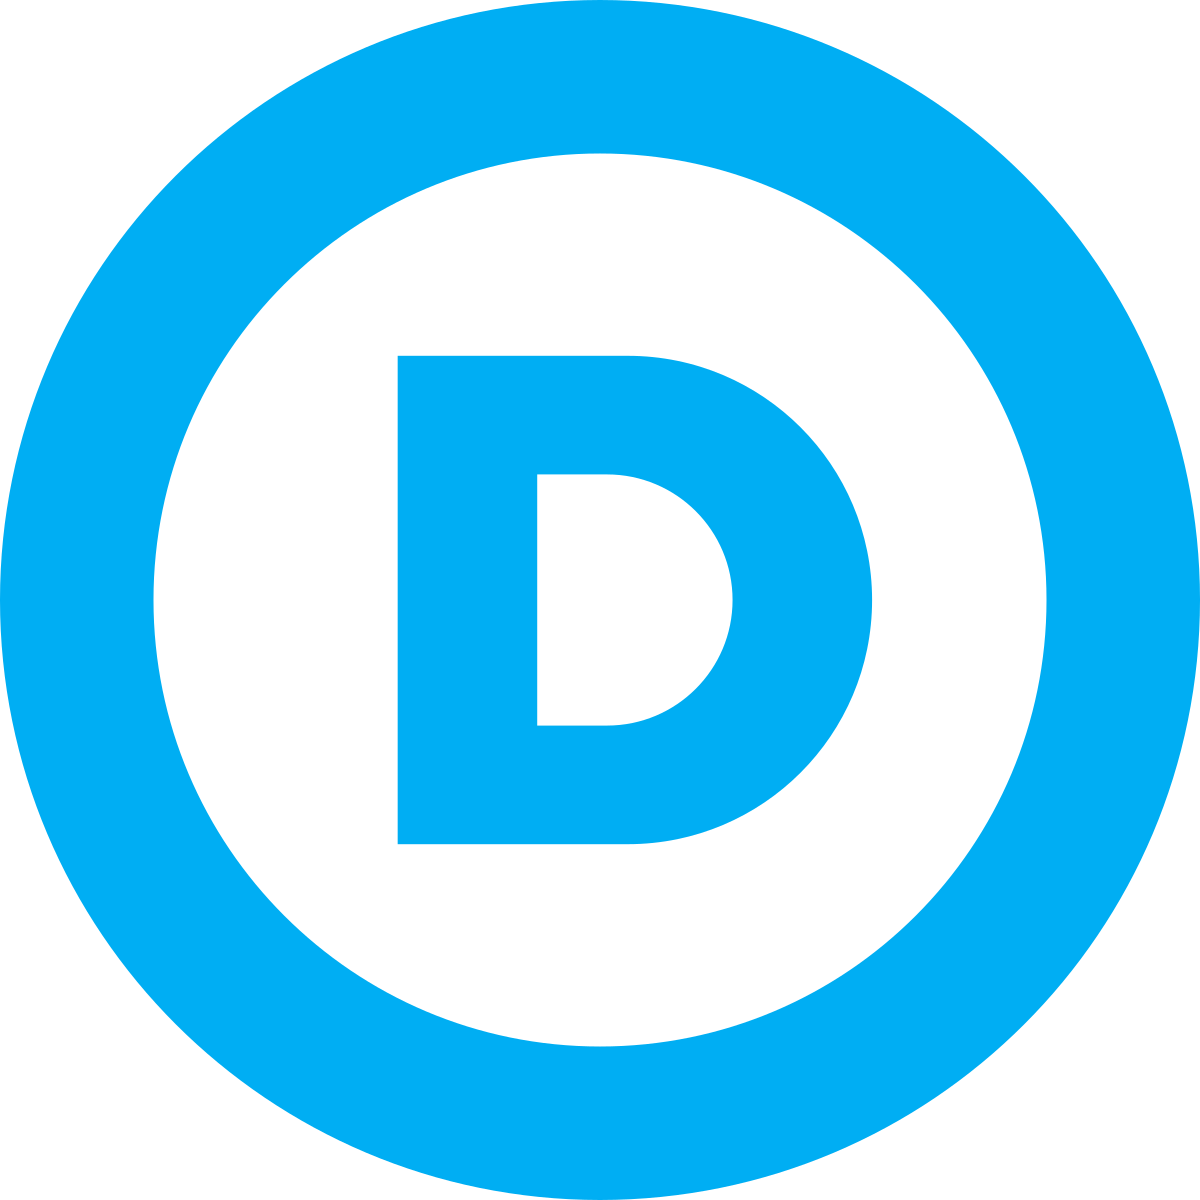 Democratic Party (United States).